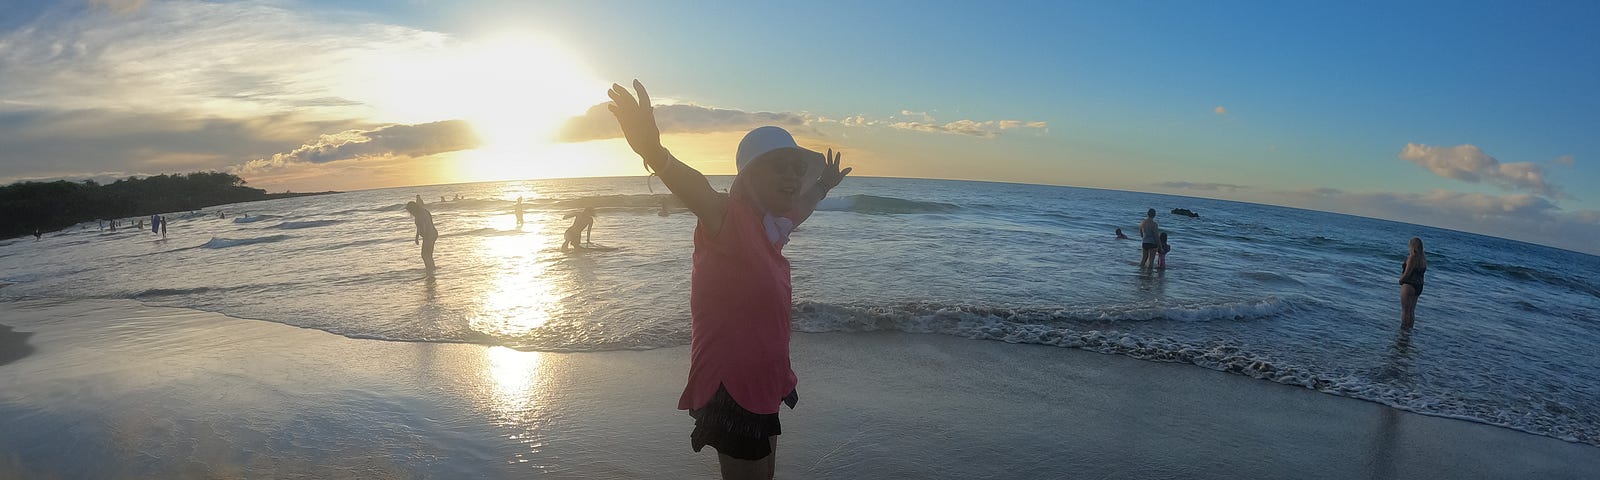 Author’s Mom waving her arms at sunset on a beach.